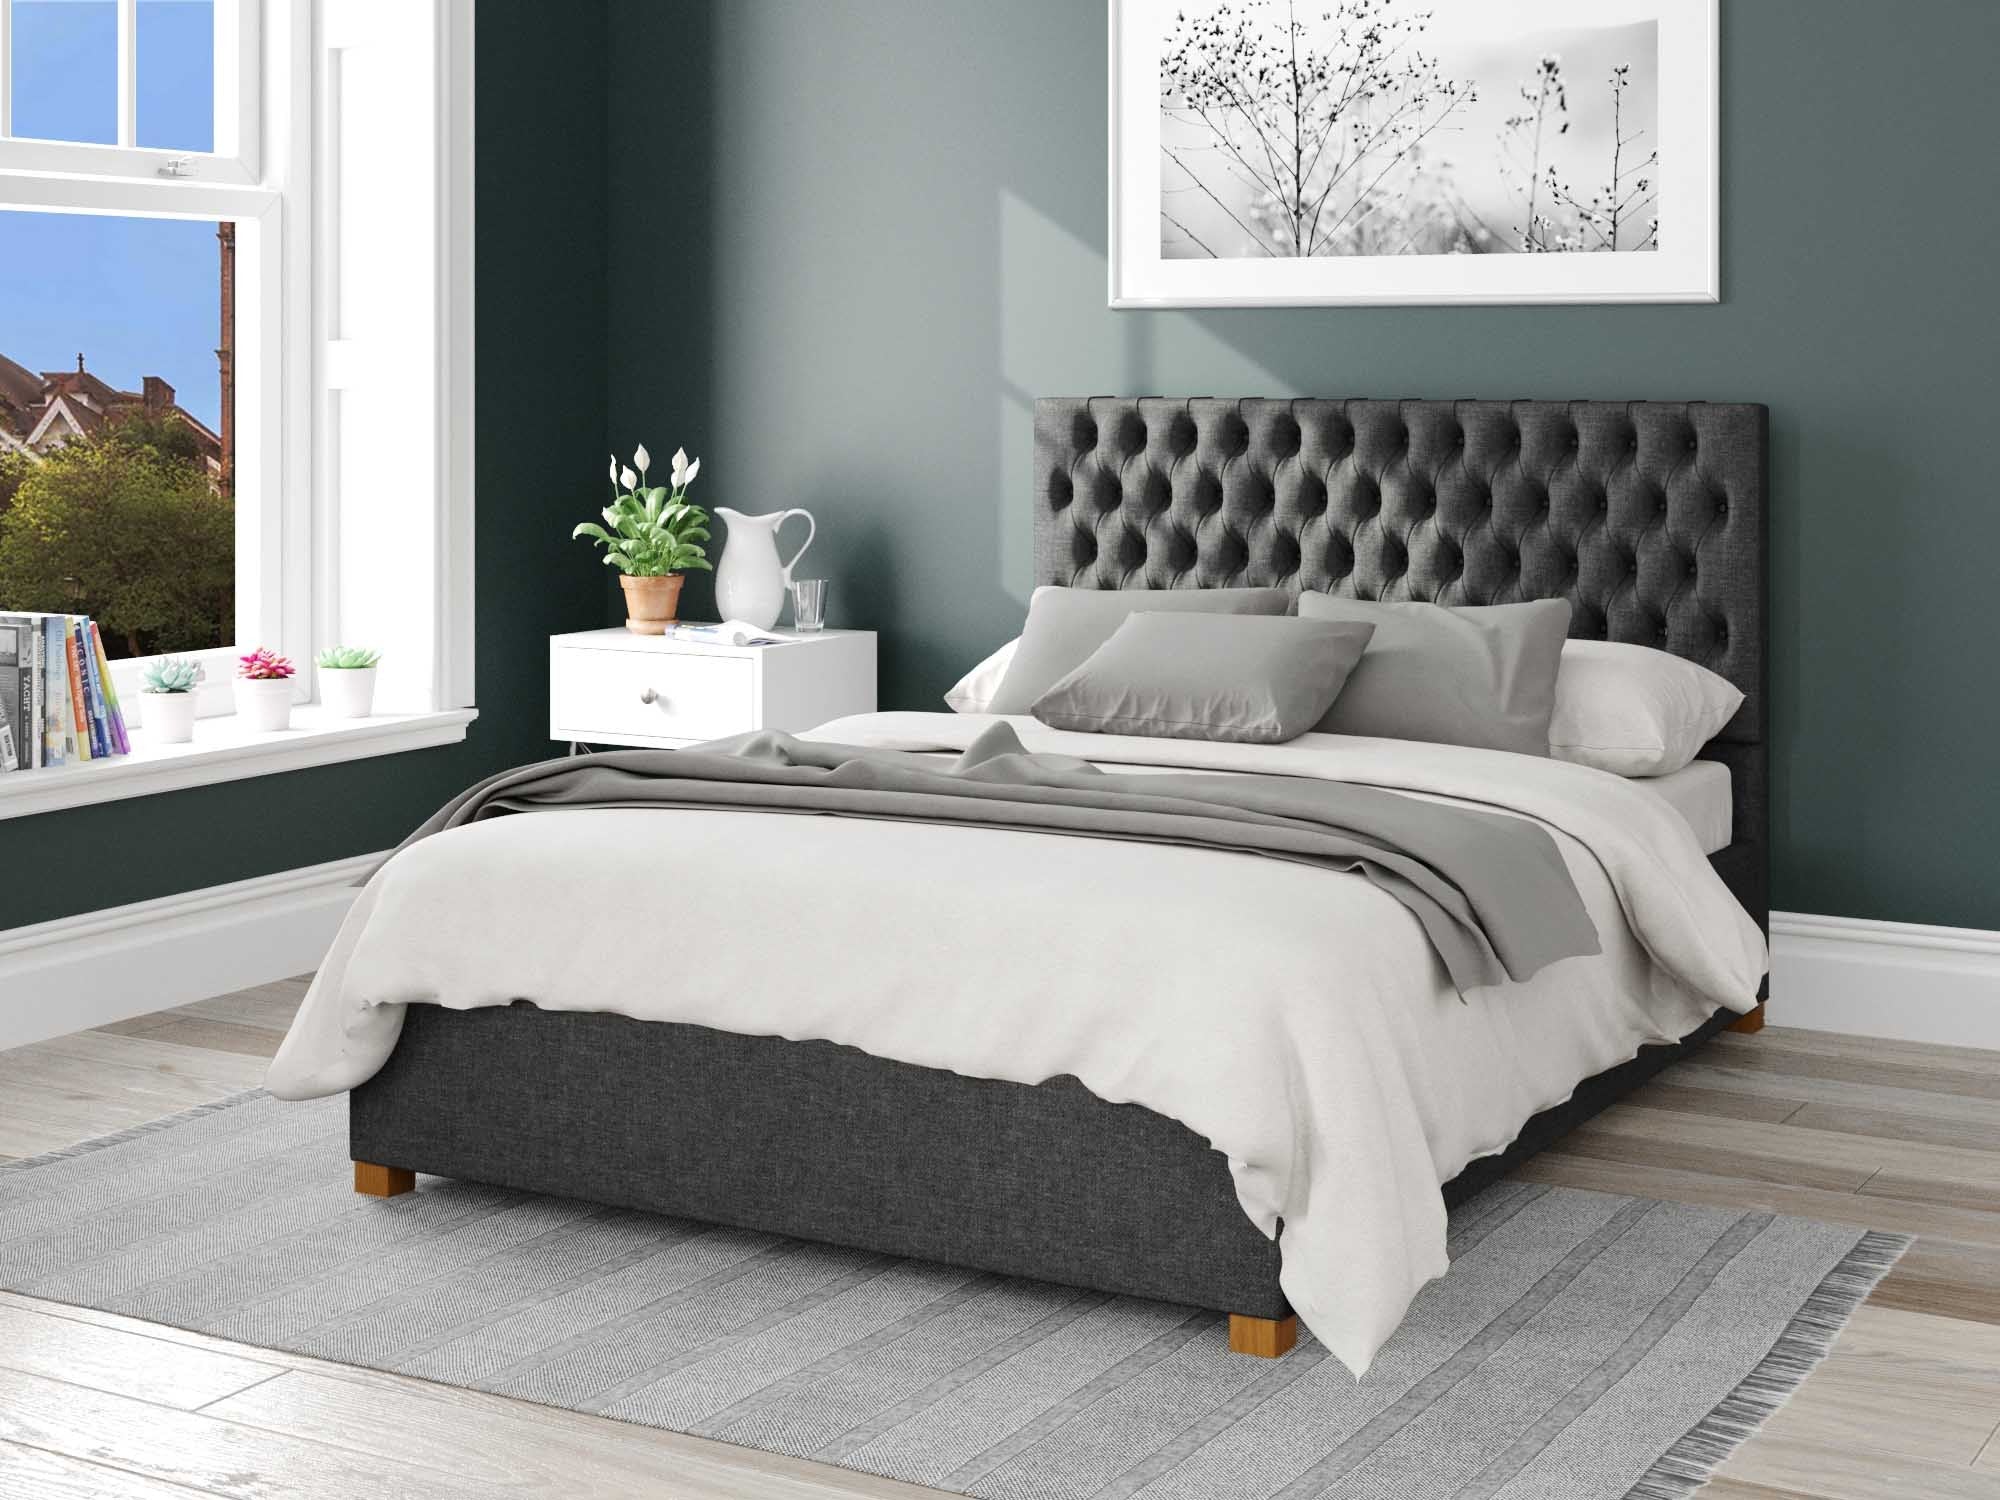 Monroe Upholstered Ottoman Bed - Saxon Twill - Charcoal